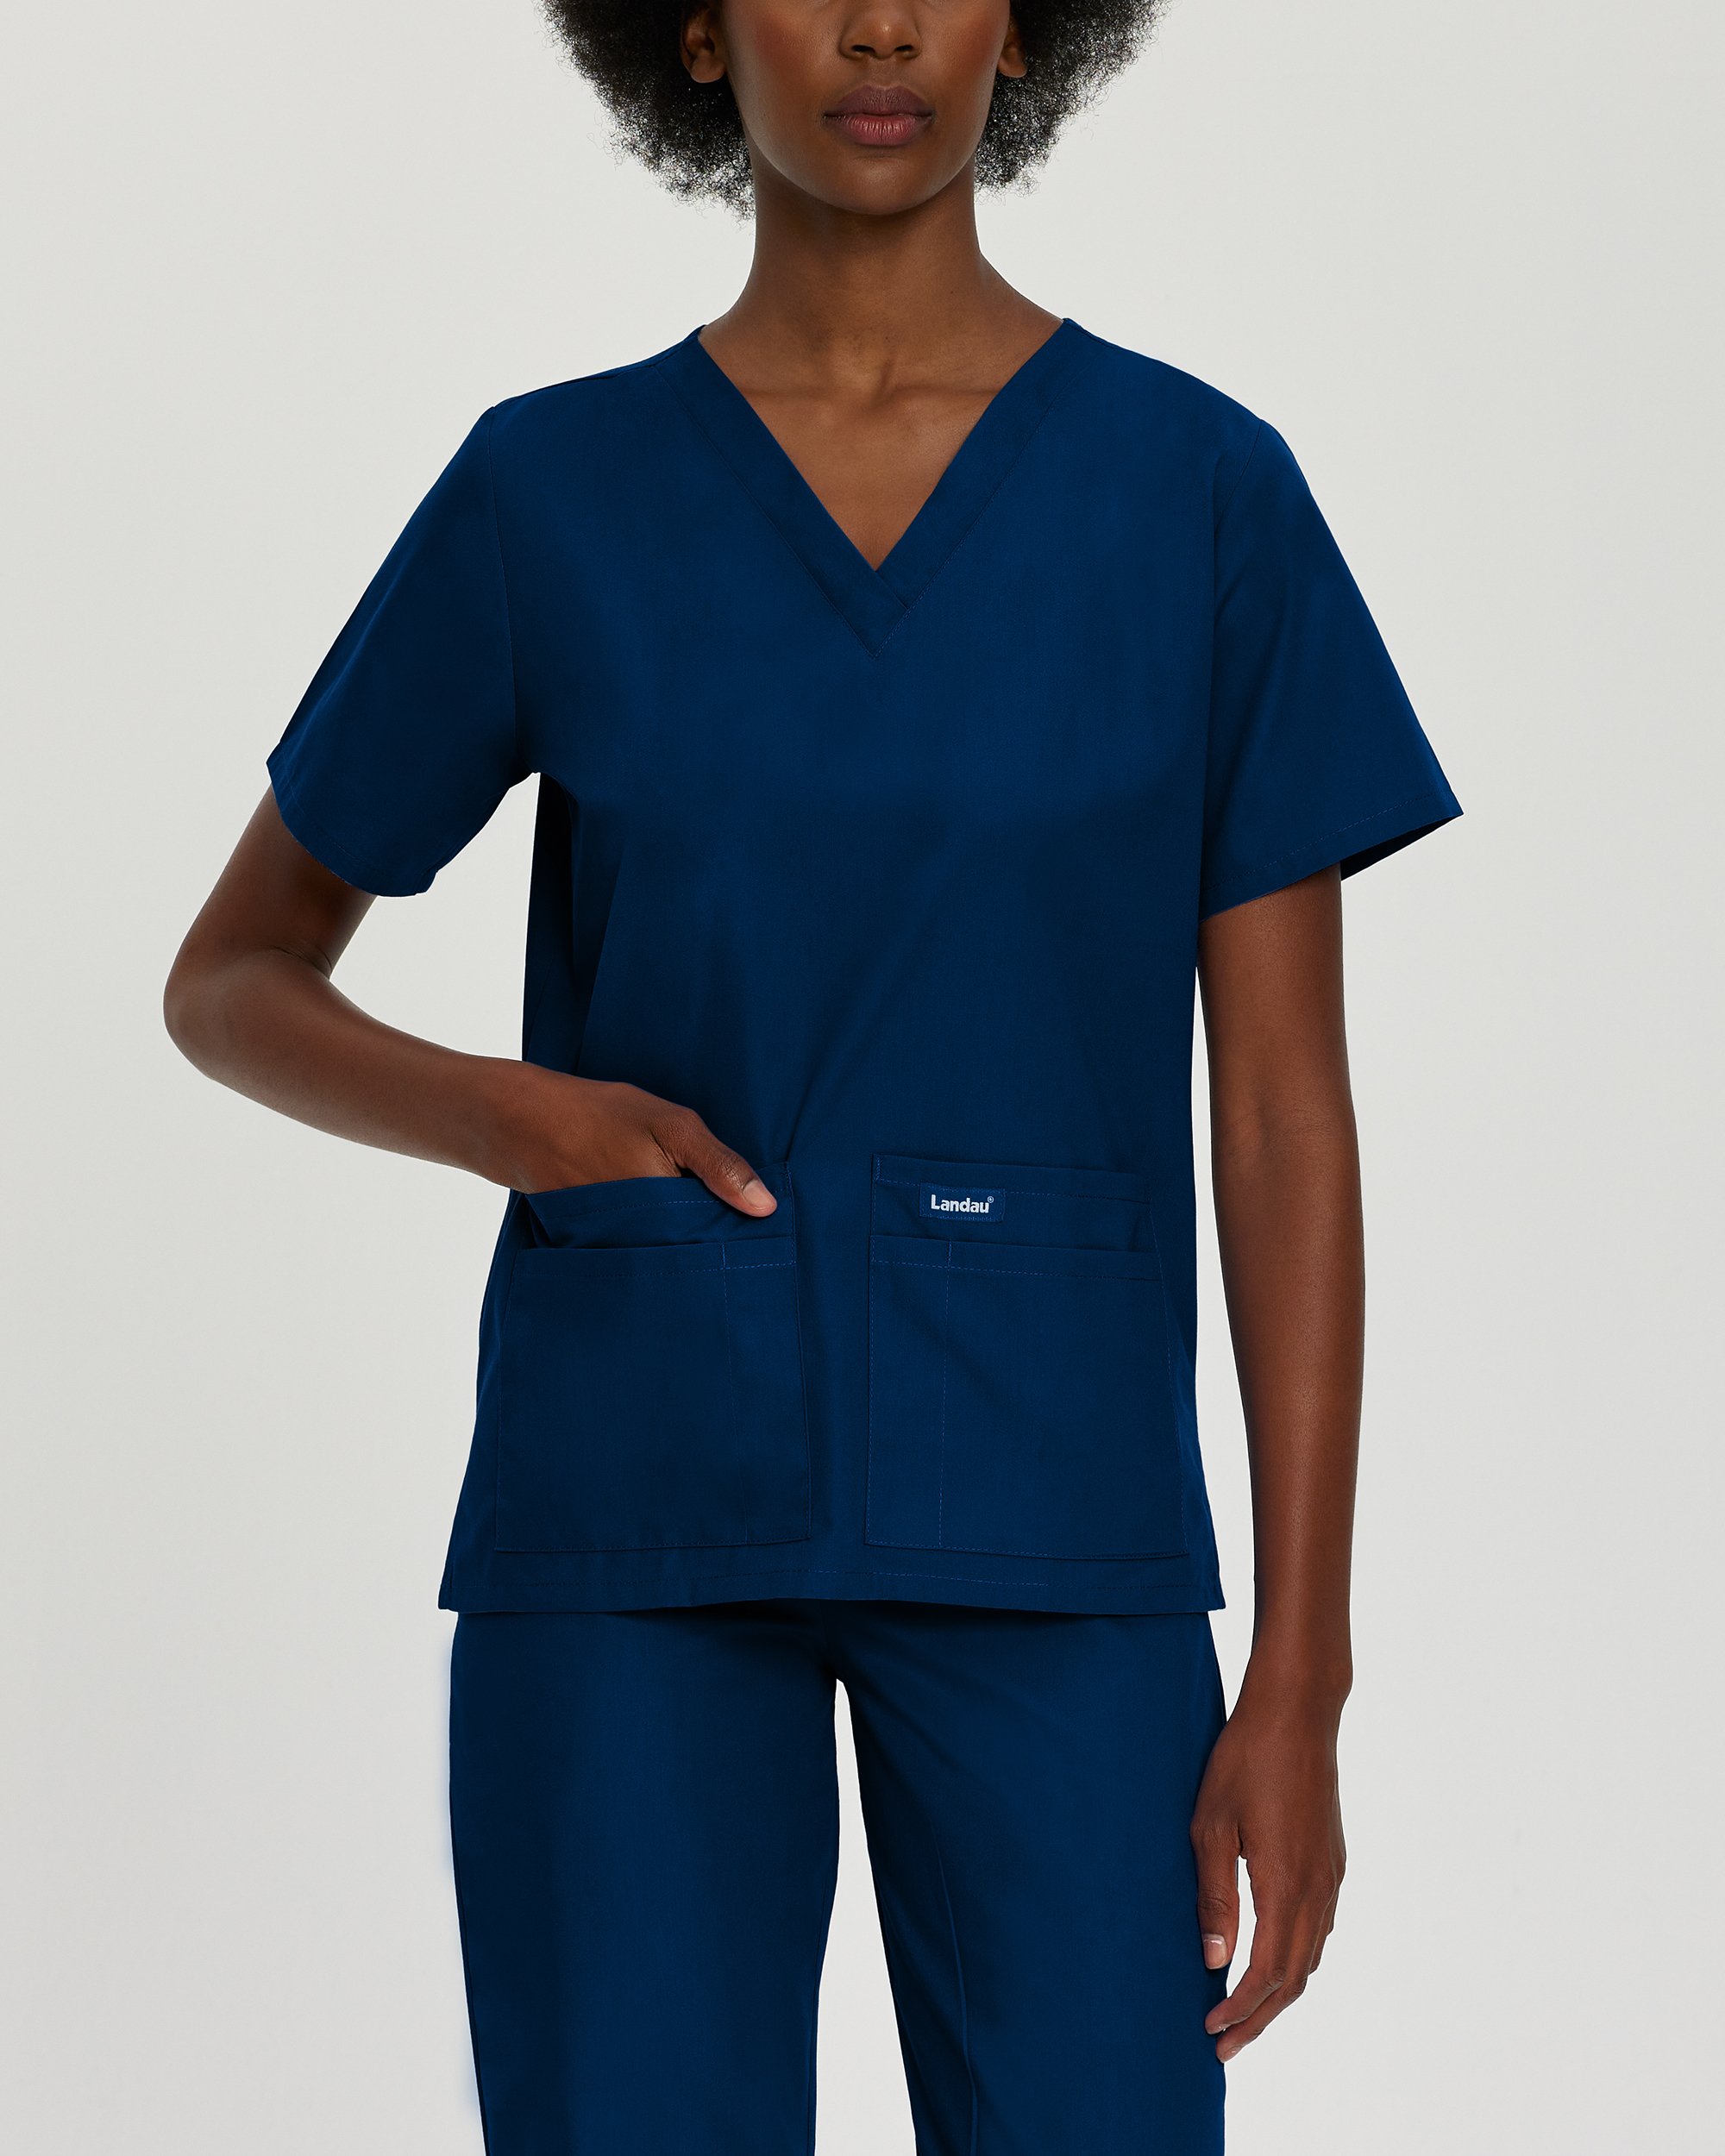 Landau Essentials Scrub Top for Women: 4 Pockets, Classic Relaxed Fit, Durable V-Neck 8219 Questions & Answers